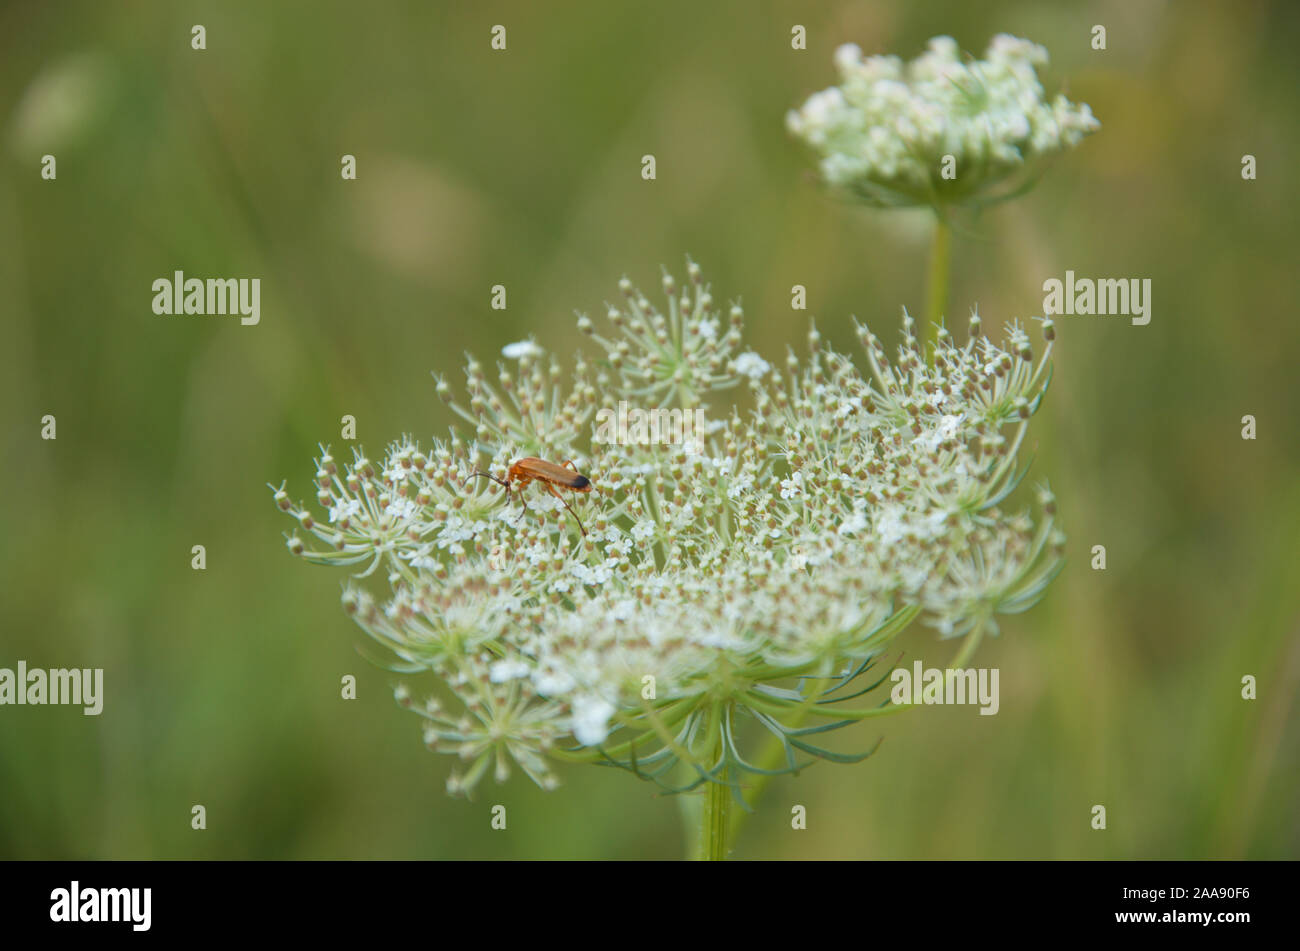 Common Red Soldier beetle on Daucus carota, known as Queen Anne's Lace Stock Photo